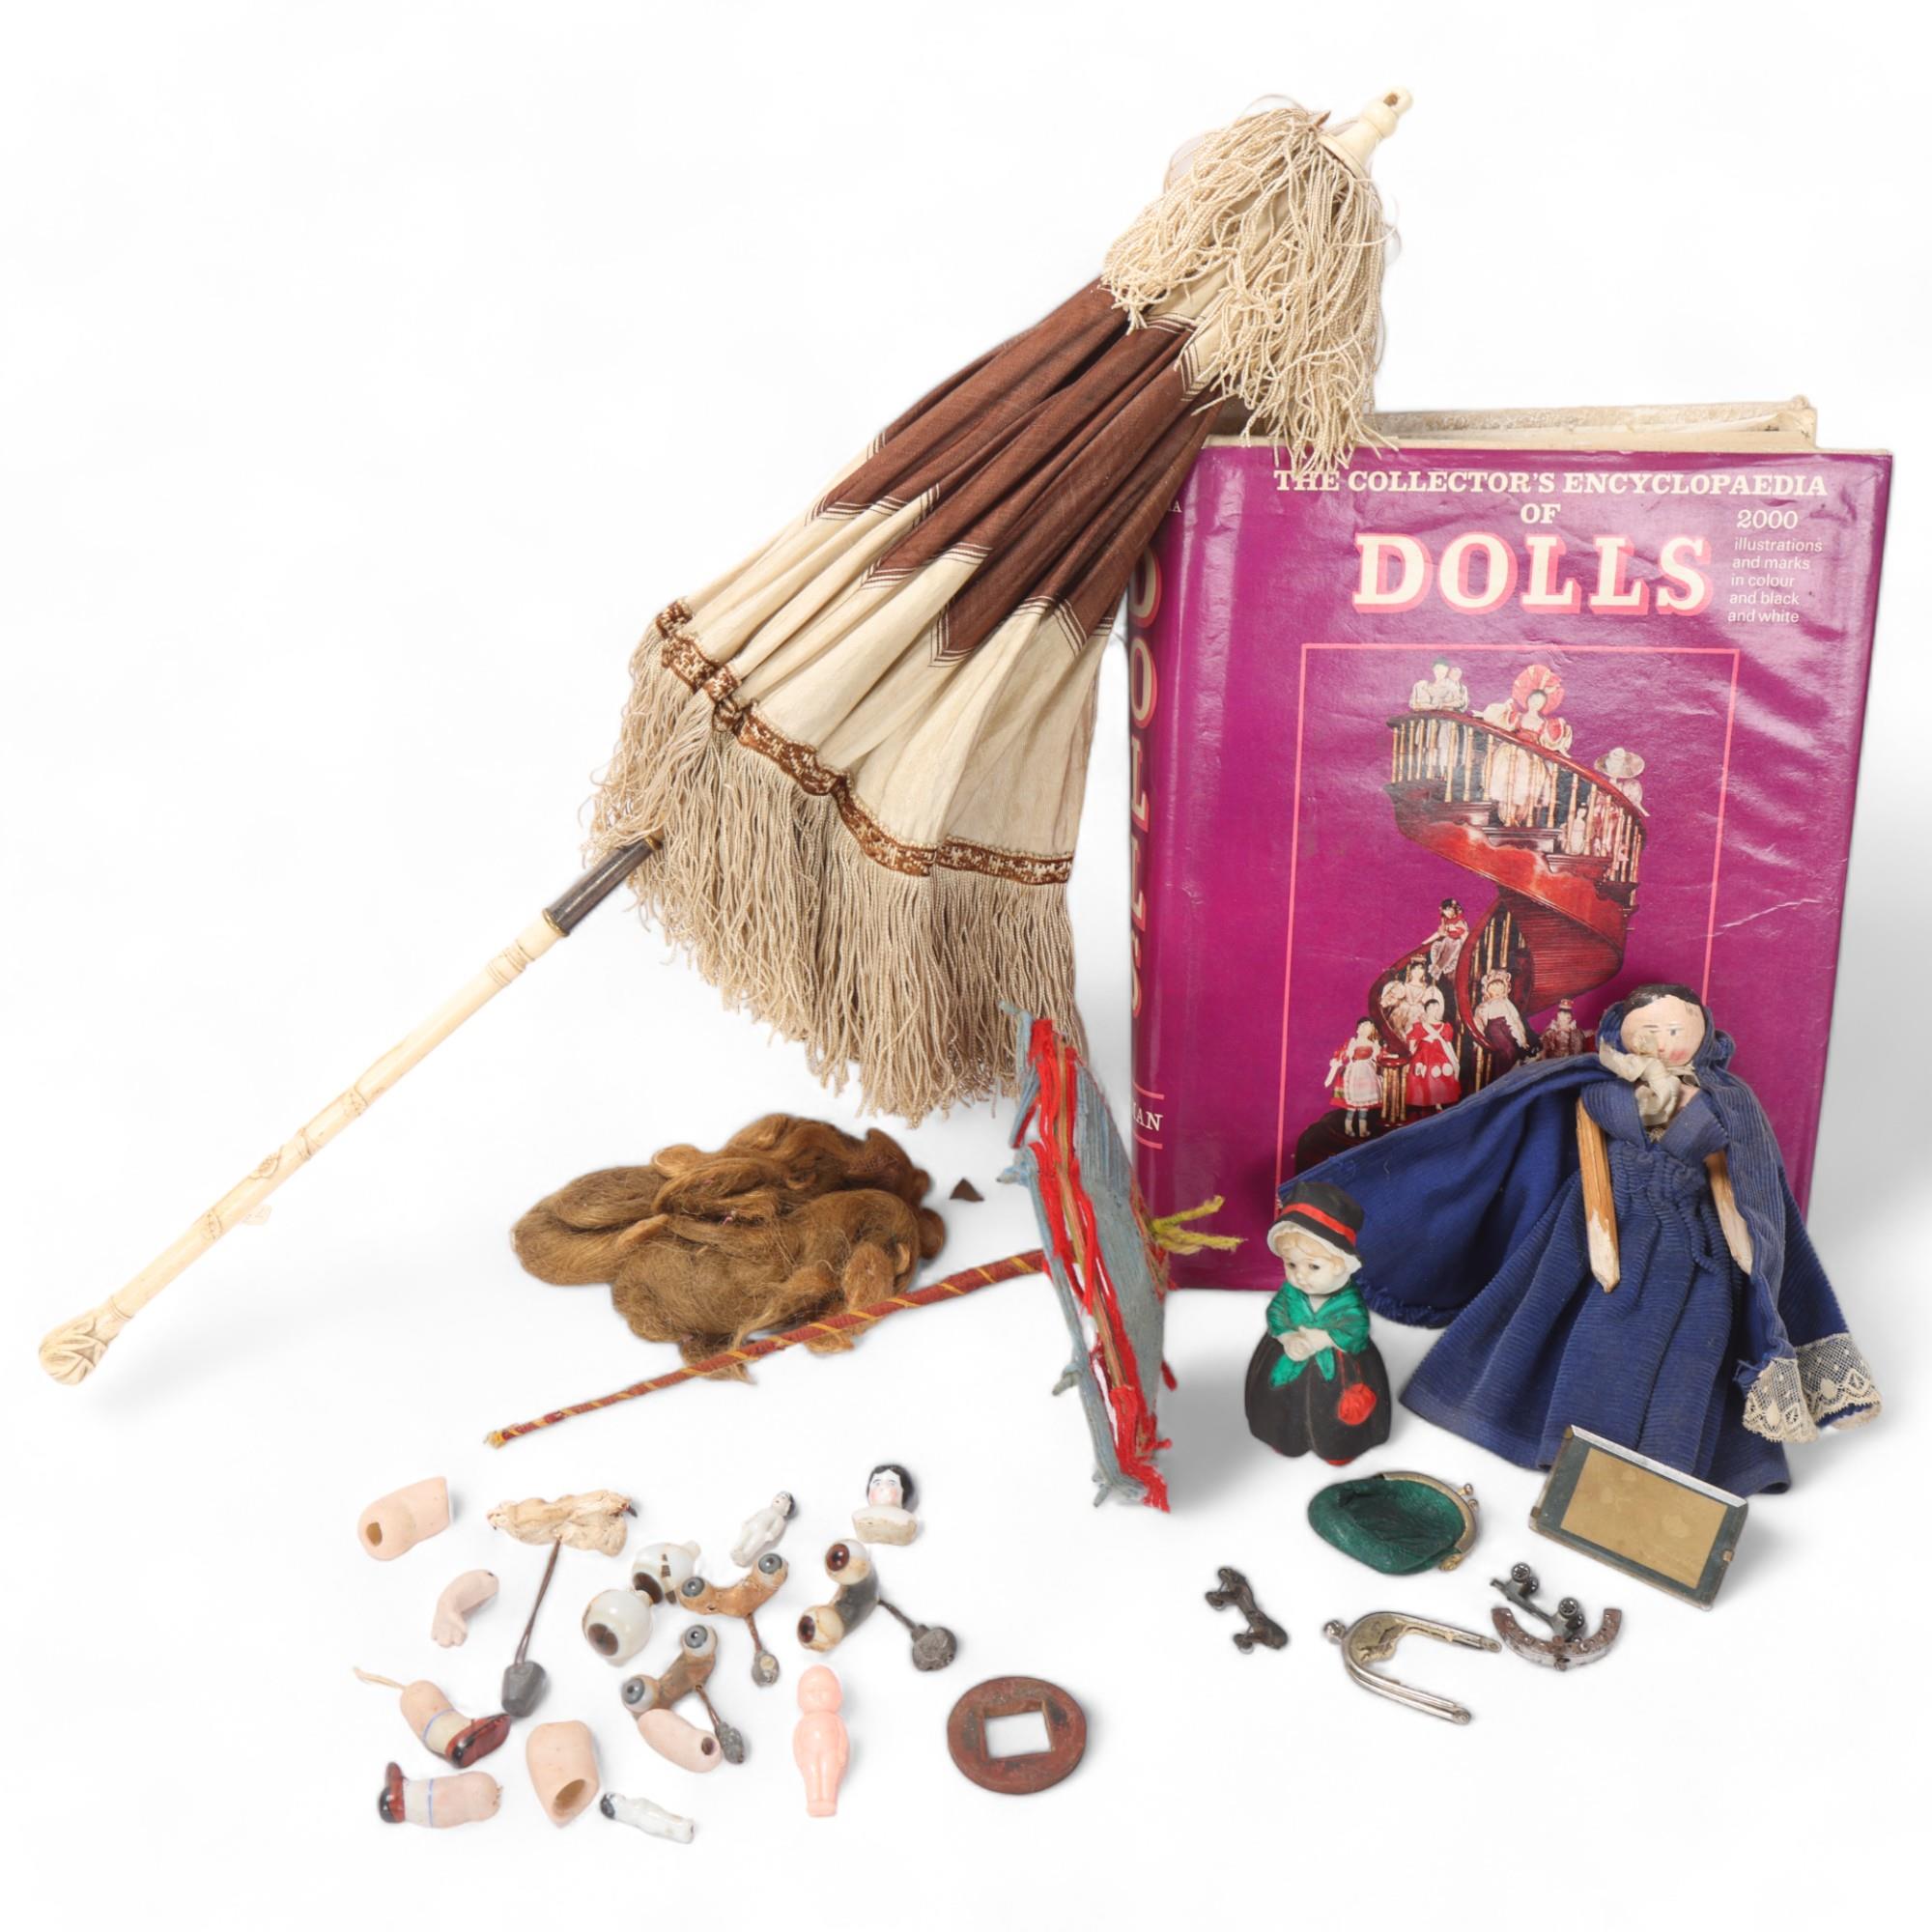 A collection of doll related items, doll's house items, spare limbs, peg doll and a book, The